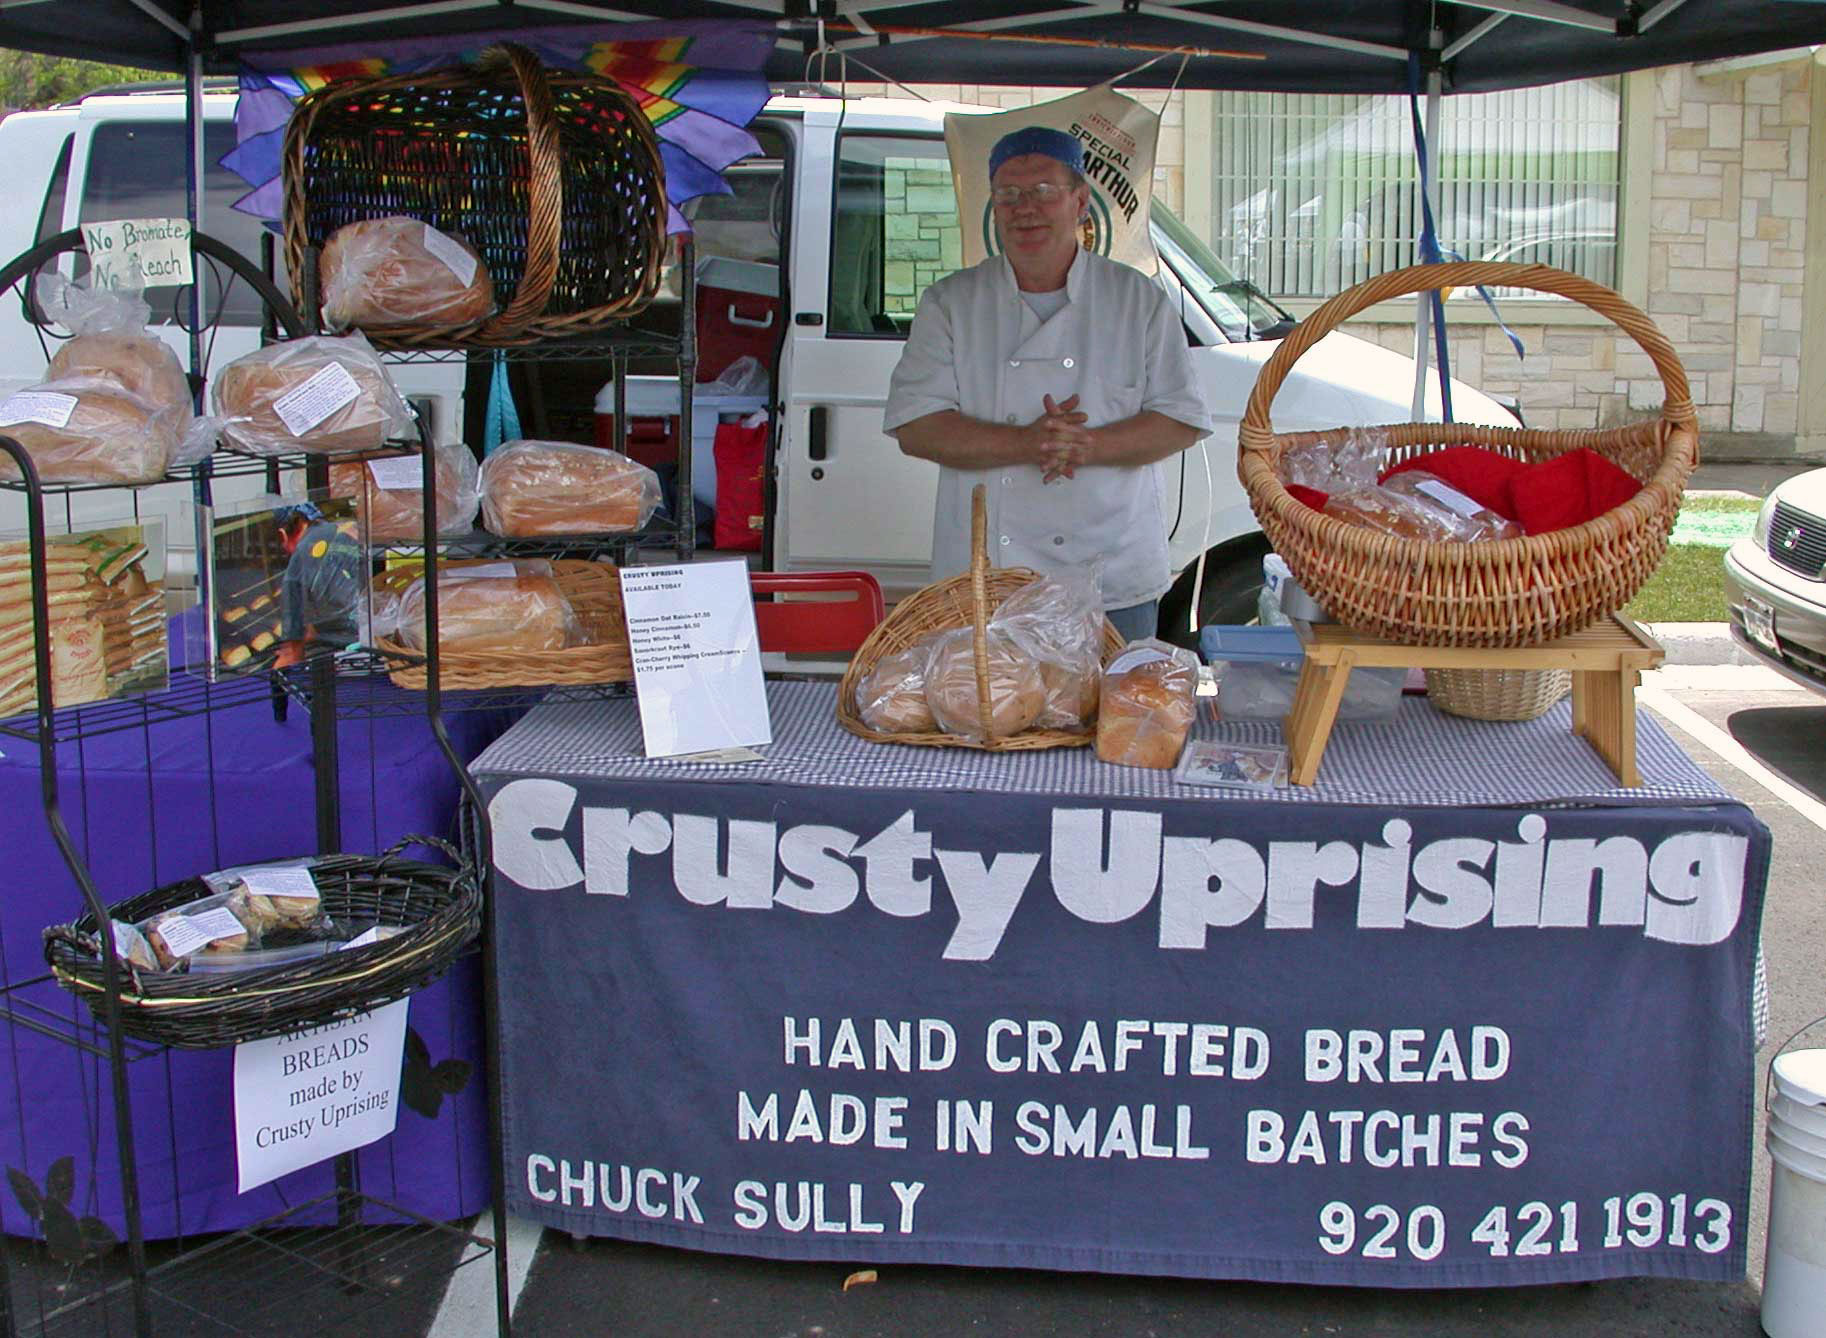 Chuck Sully is please to offer a sample of his freshly baked breads from Crusty Uprising.